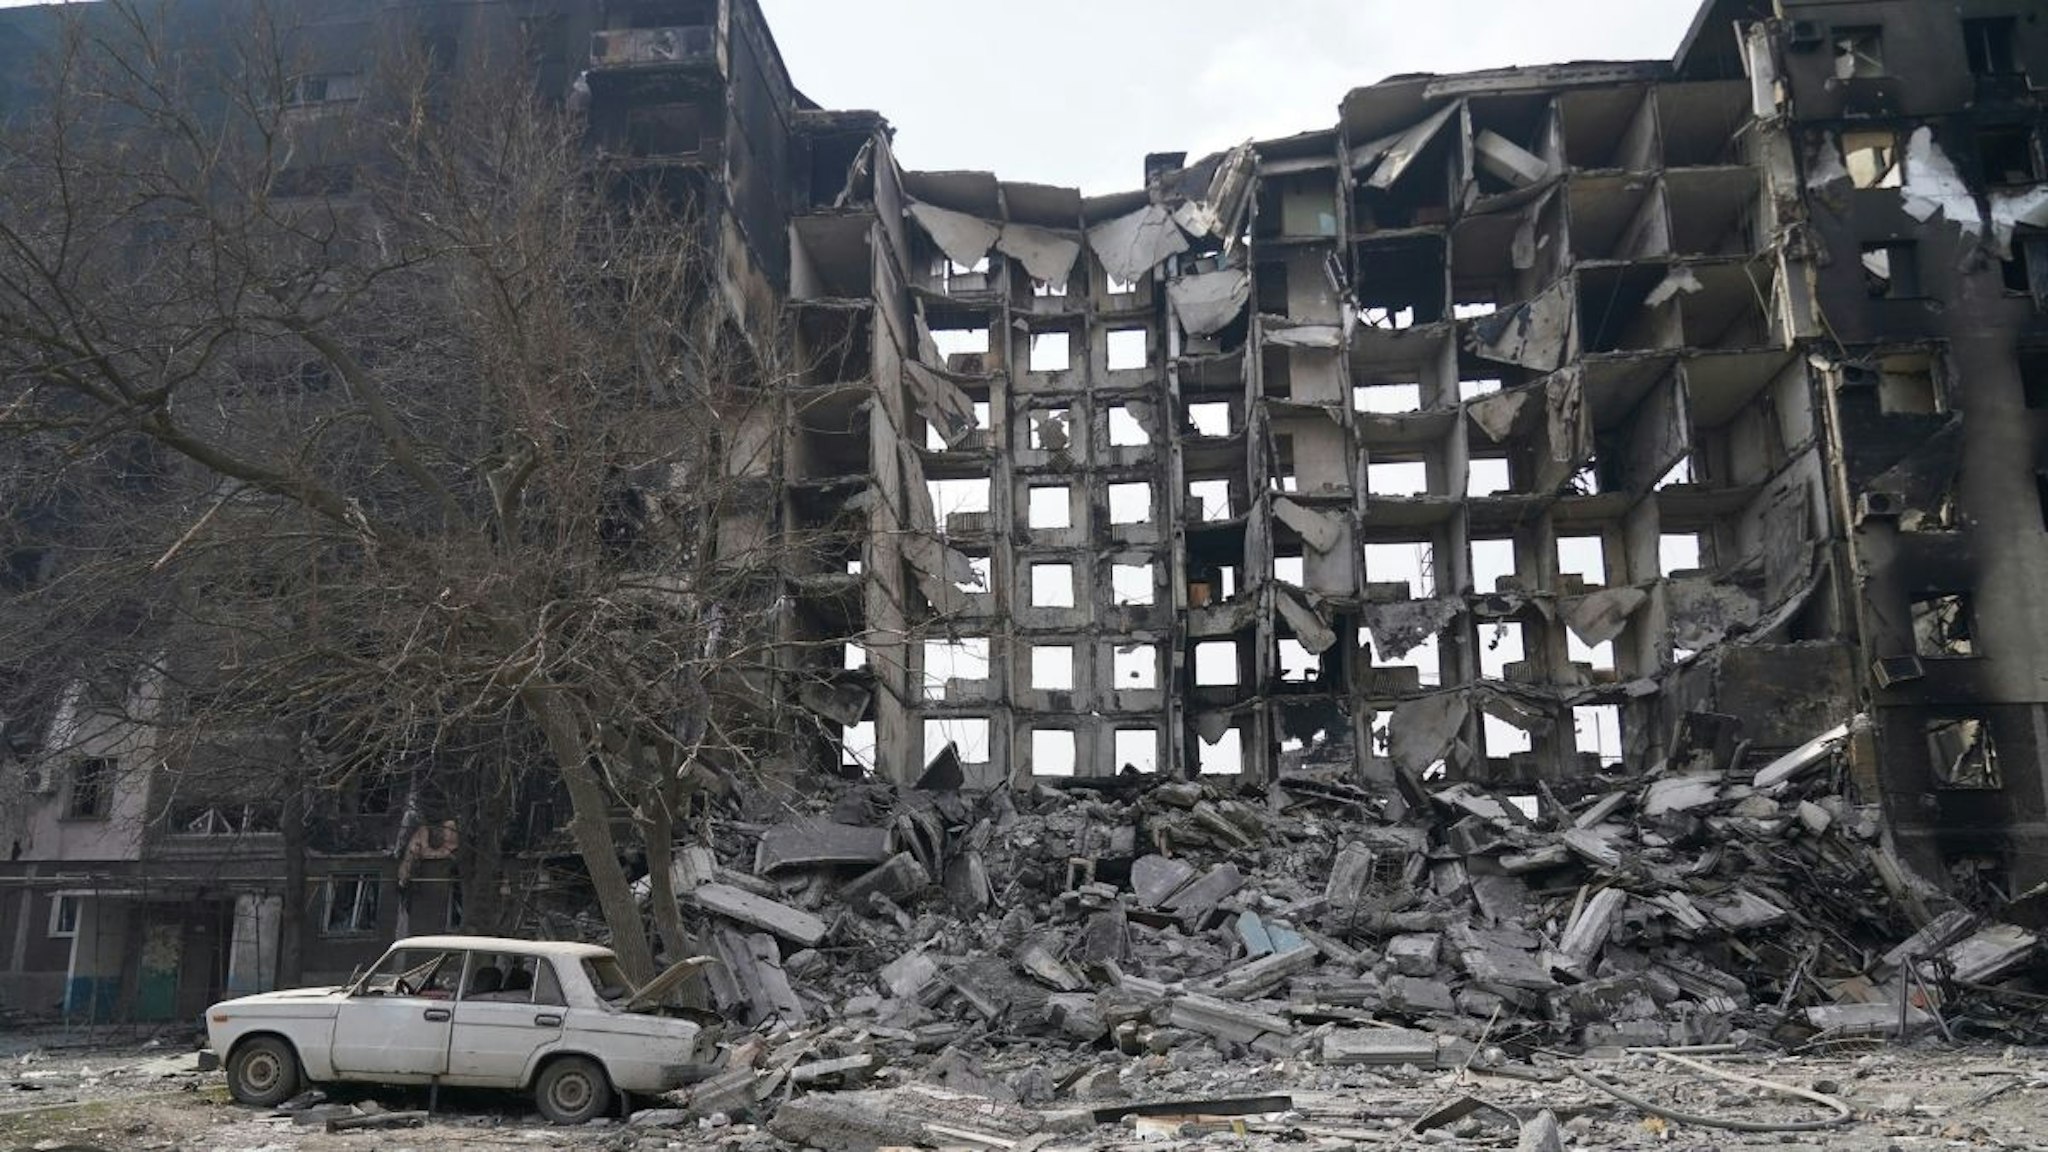 Collapsed building is seen as civilians are being evacuated along humanitarian corridors from the Ukrainian city of Mariupol under the control of Russian military and pro-Russian separatists, on March 26, 2022.